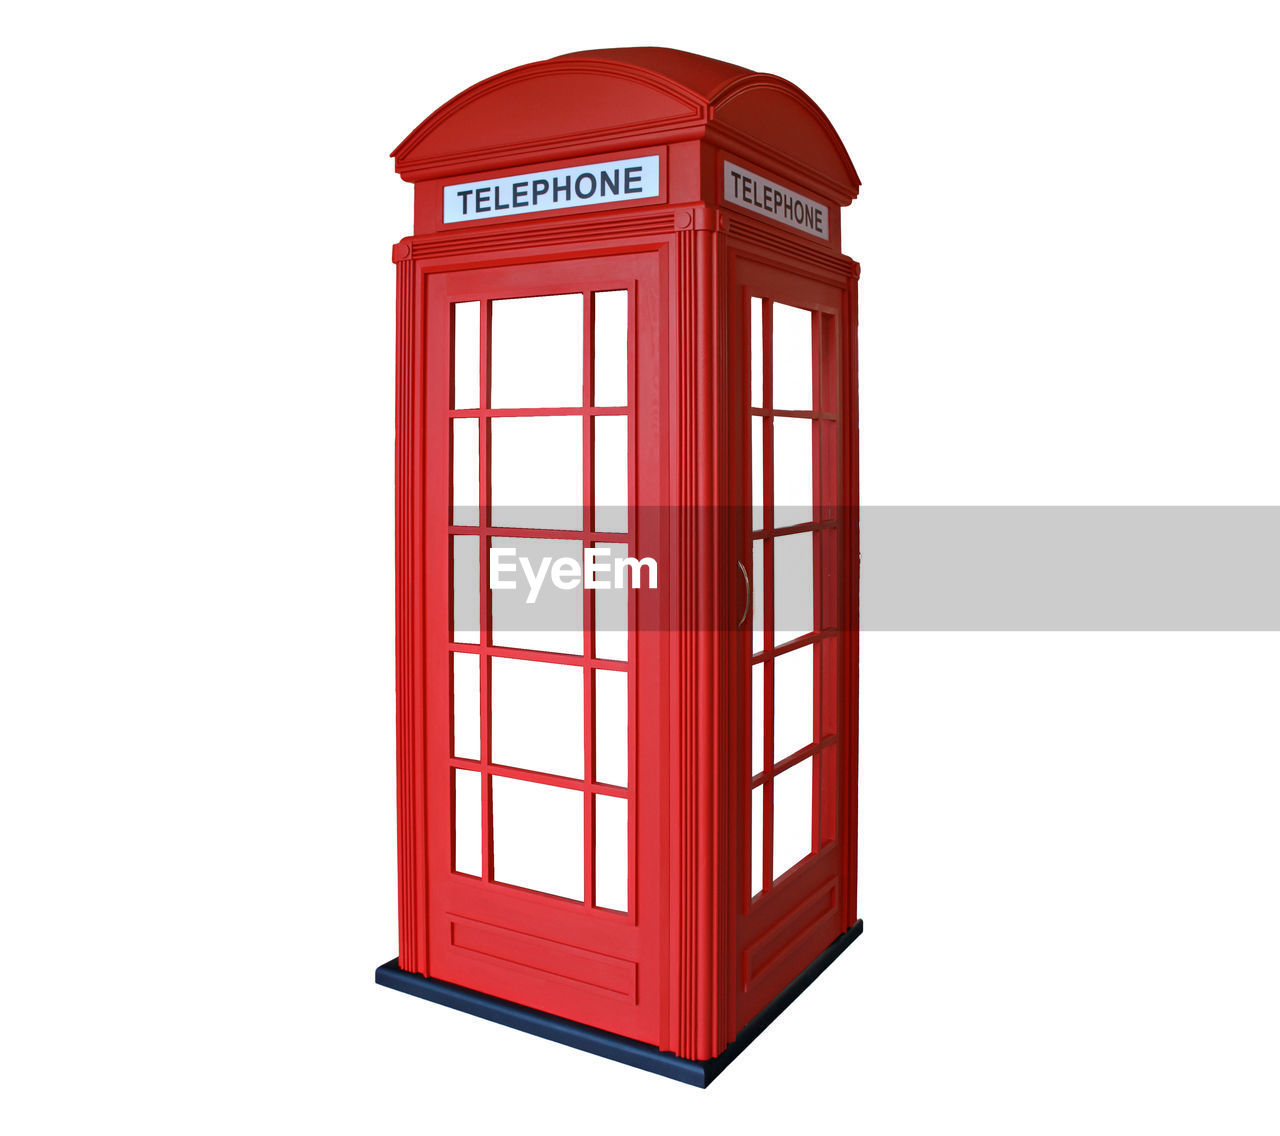 LOW ANGLE VIEW OF RED TELEPHONE BOOTH AGAINST WHITE BACKGROUND